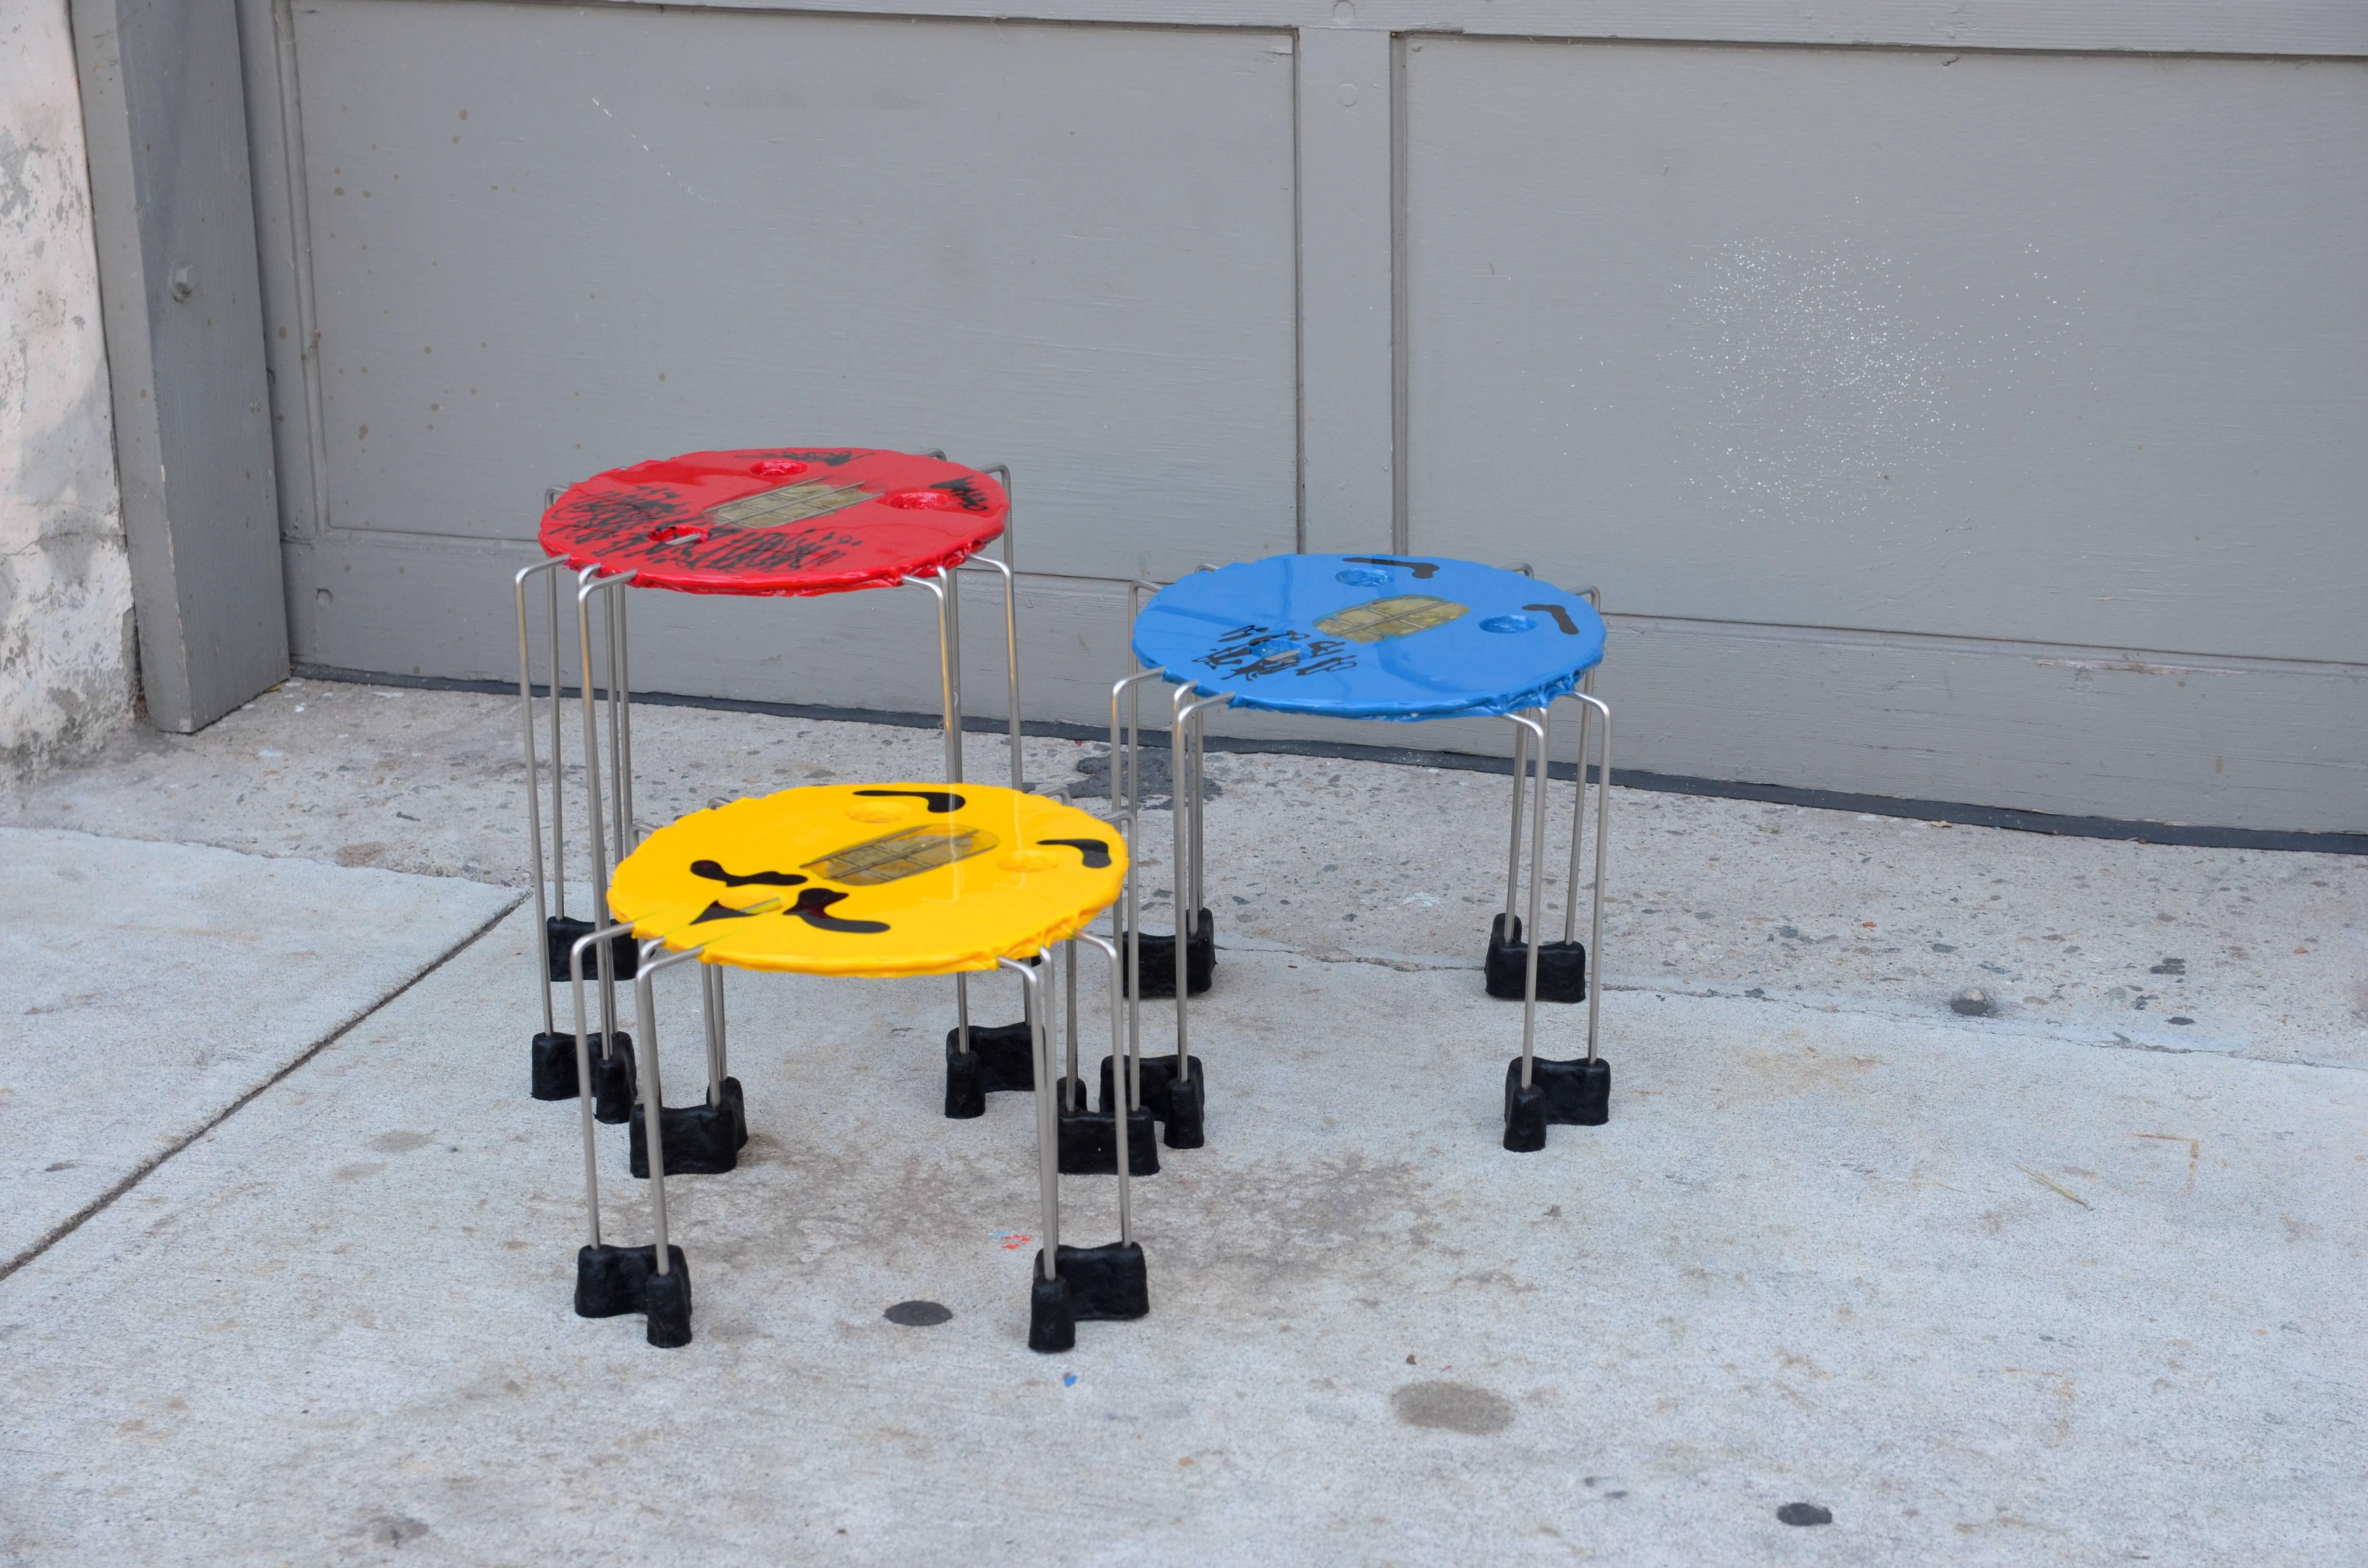 Set of whimsical colored side tables by Gaetano Pesce. 15 in. diameter each. 14 in. height is for the tallest red table. 12 in. tall blue one. 9 in. tall yellow one.